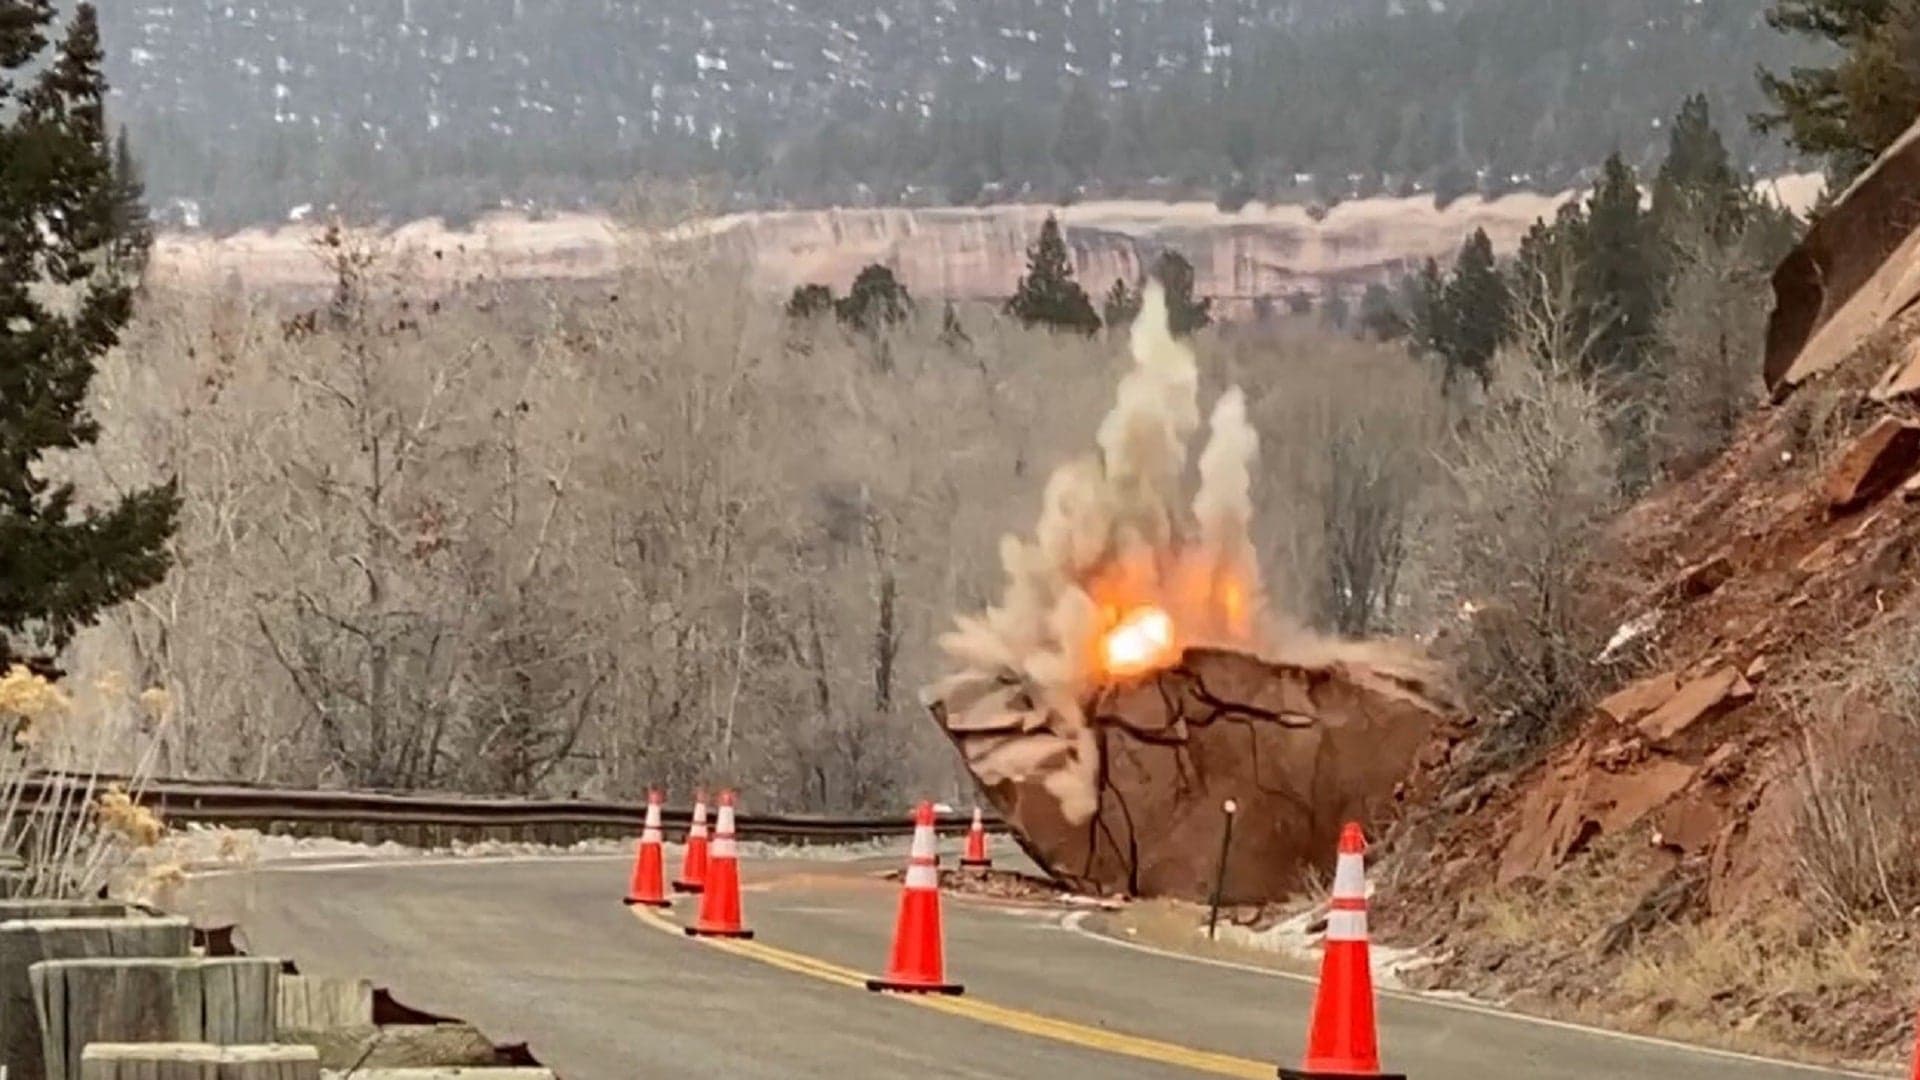 Giant Boulder Blocks Colorado Road. Then 16 Pounds of Dynamite Get Involved